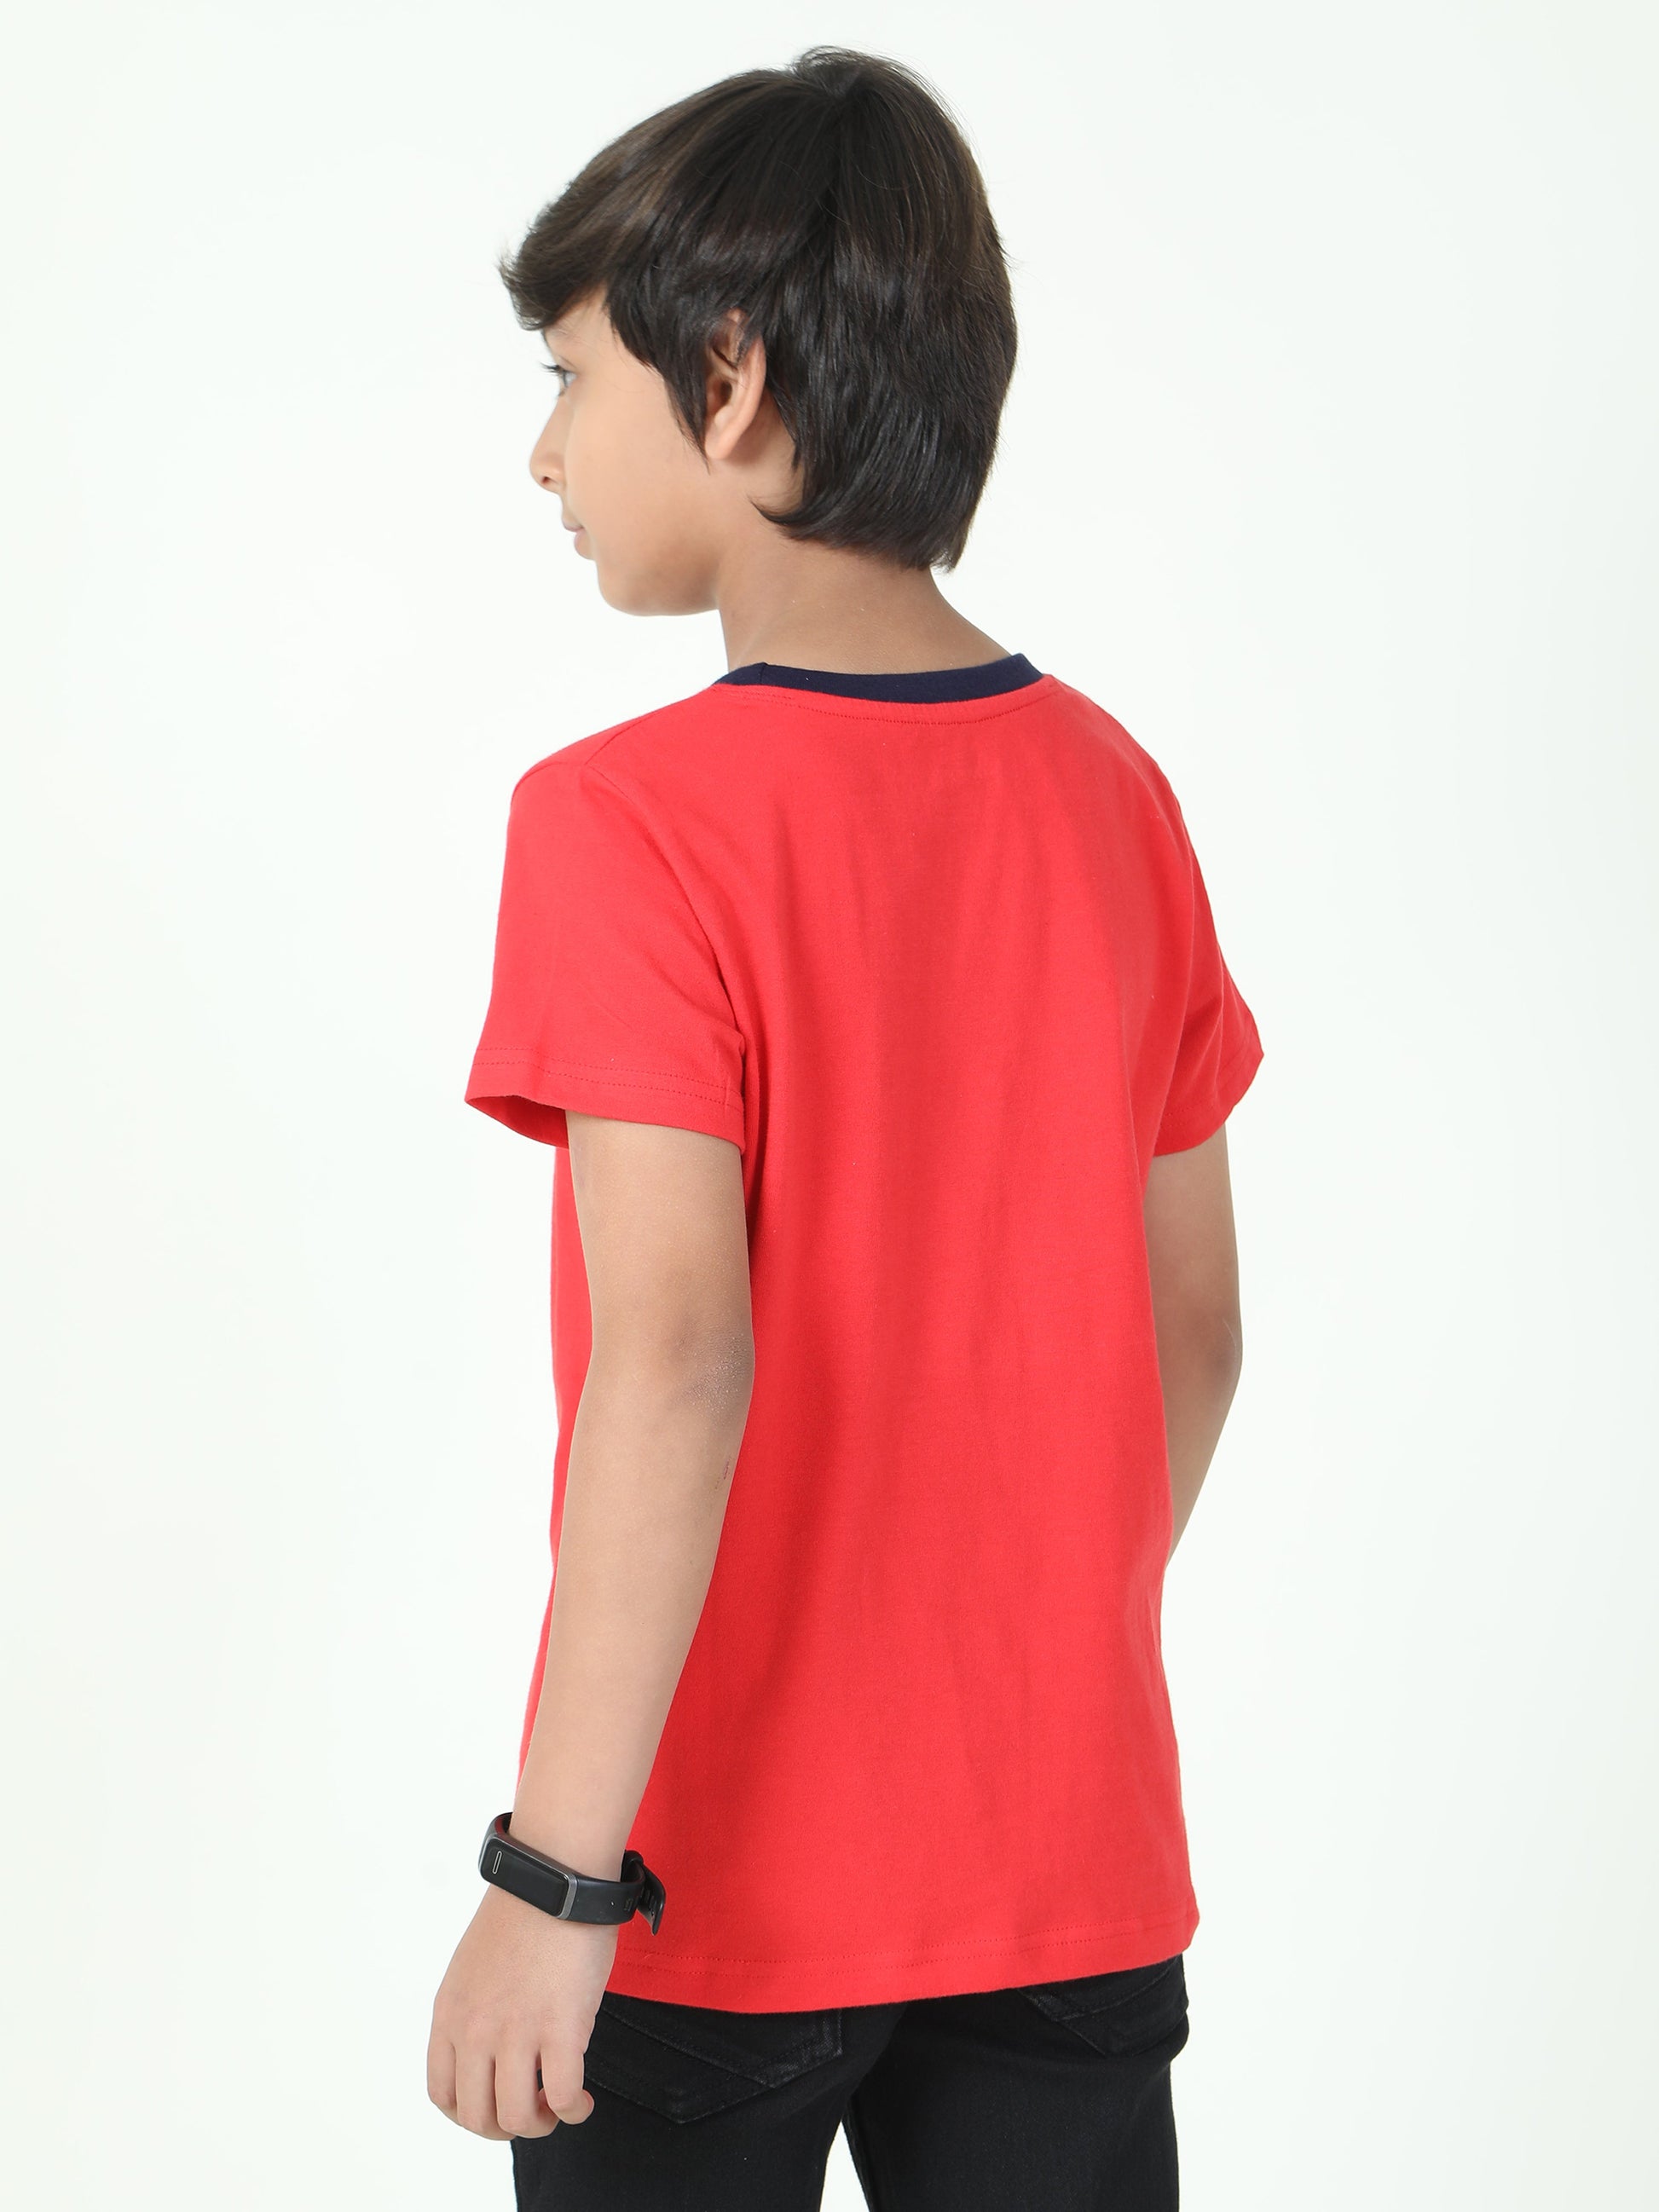 Born to Game Boys T-Shirt ( Red )